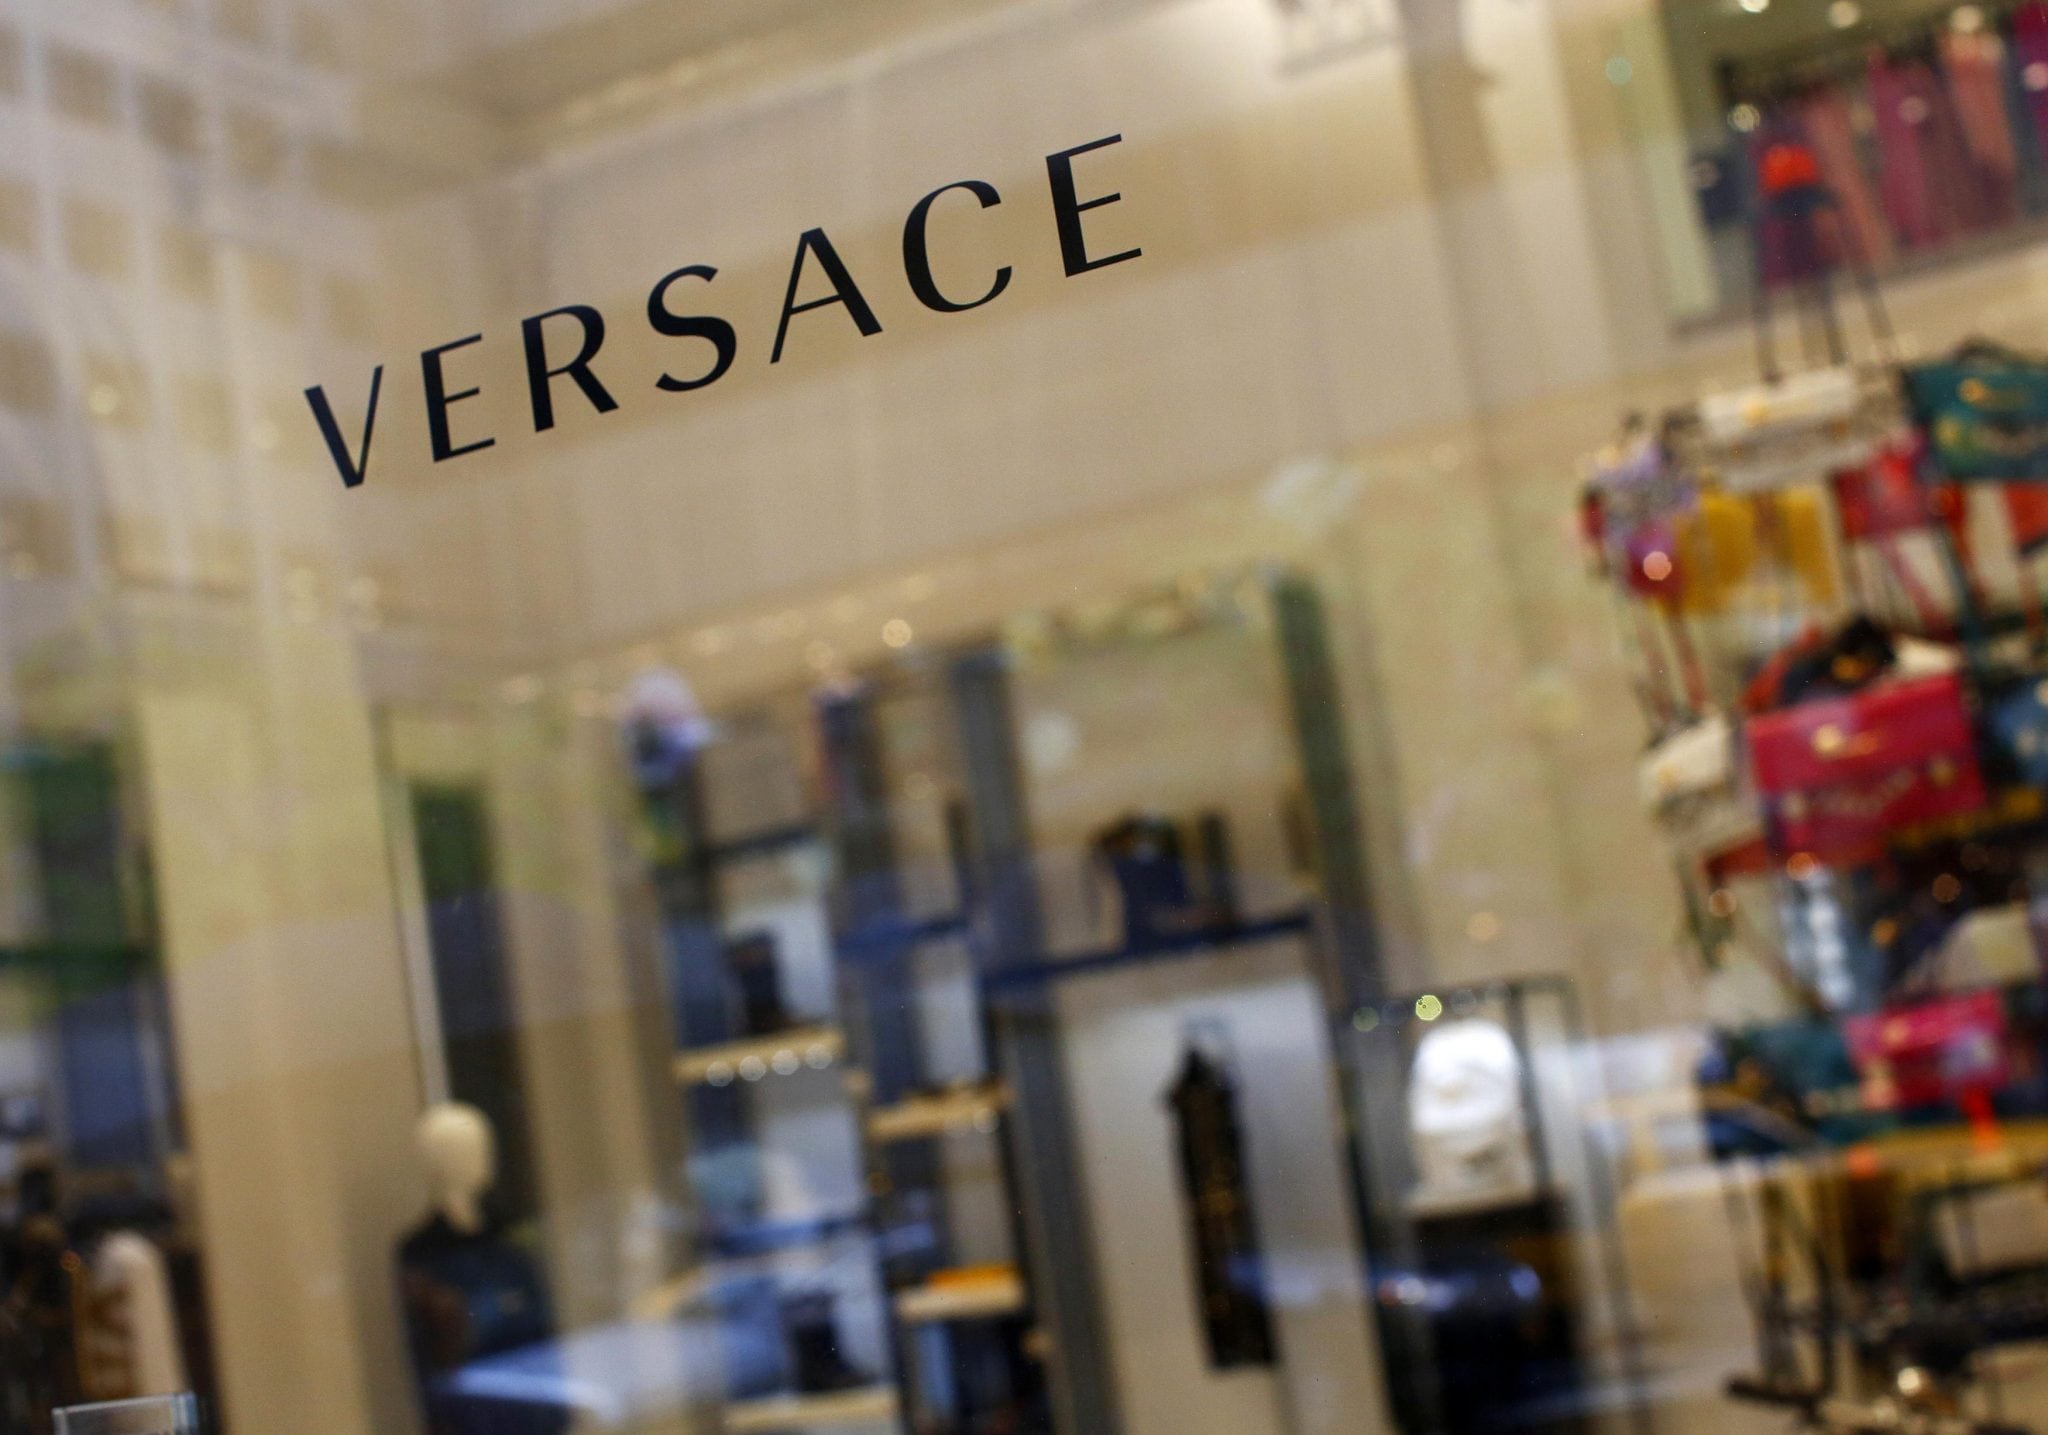 A sign is seen for high-end retail store Versace along 5th Avenue in New York May 19, 2013.